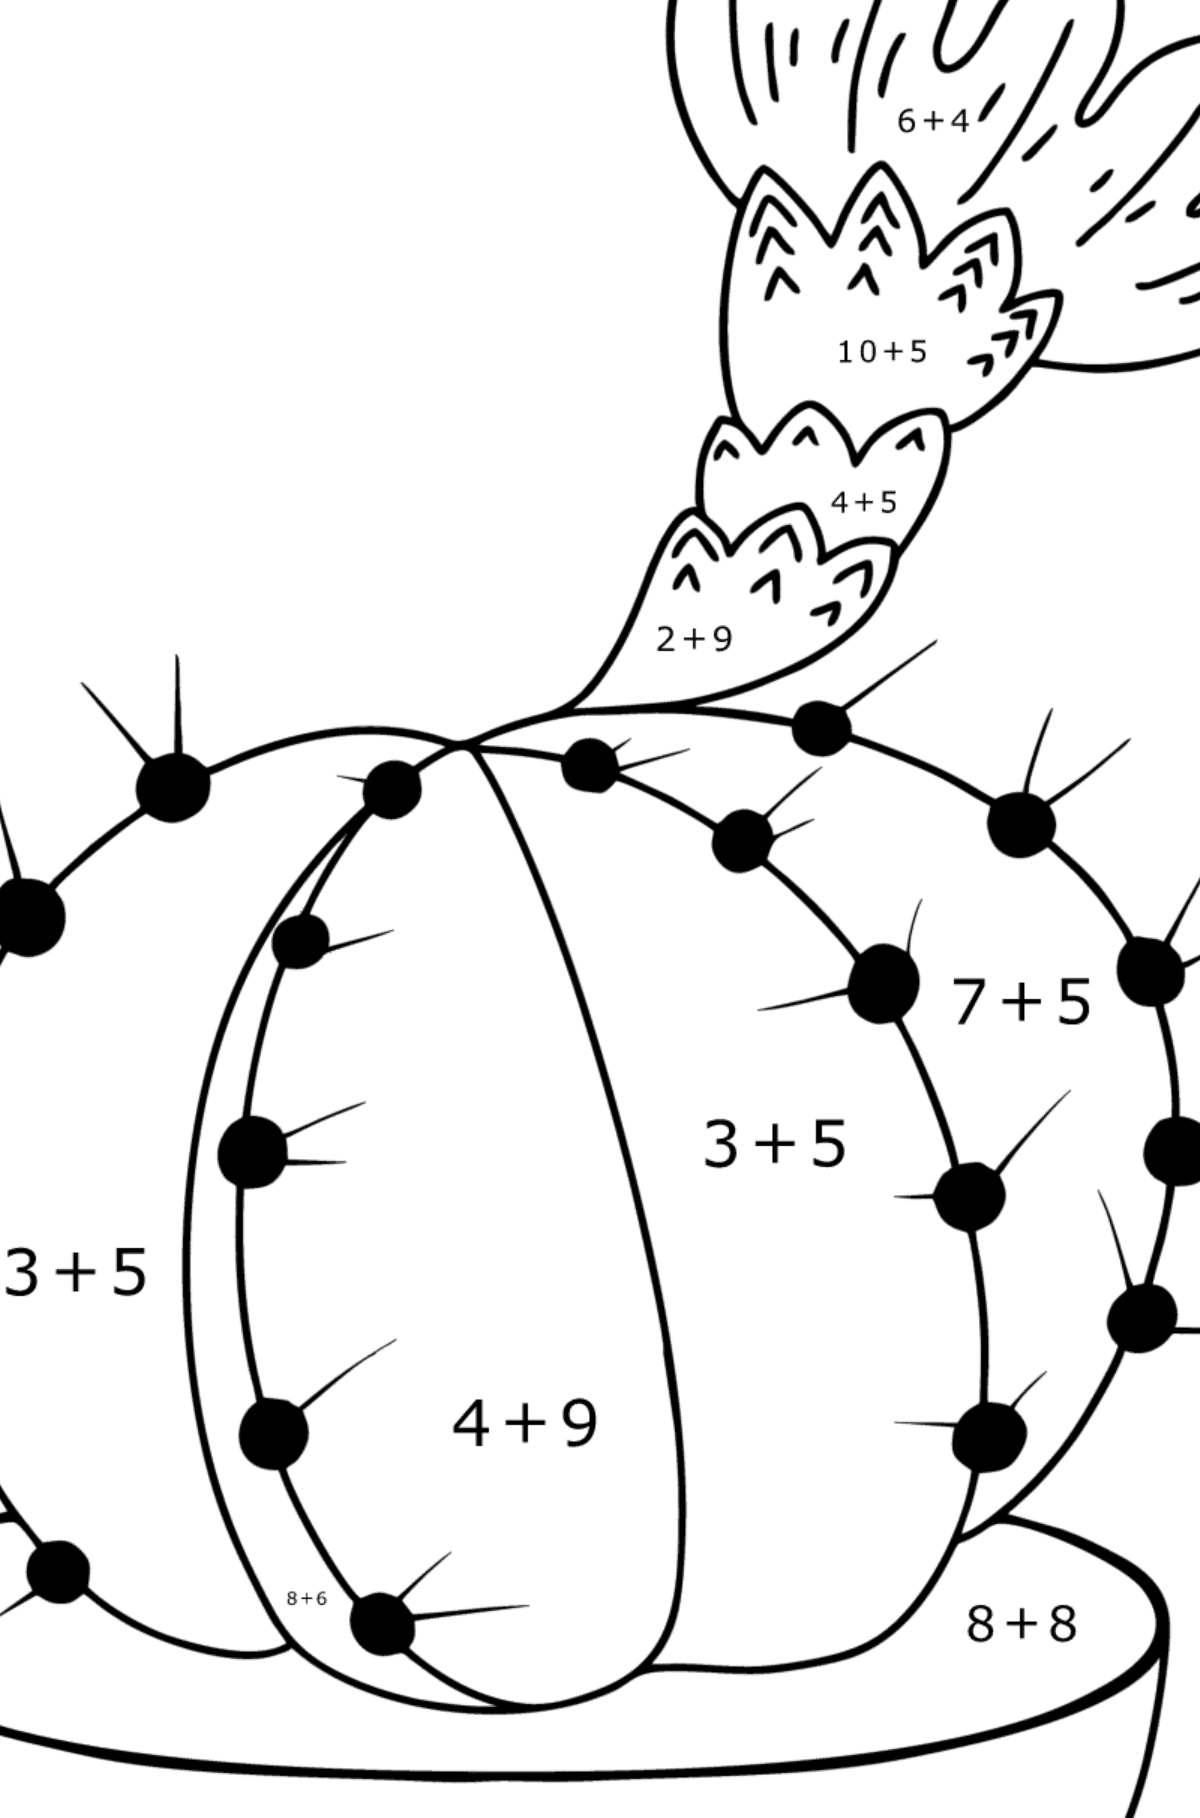 Cute cactus coloring pages - Math Coloring - Addition for Kids